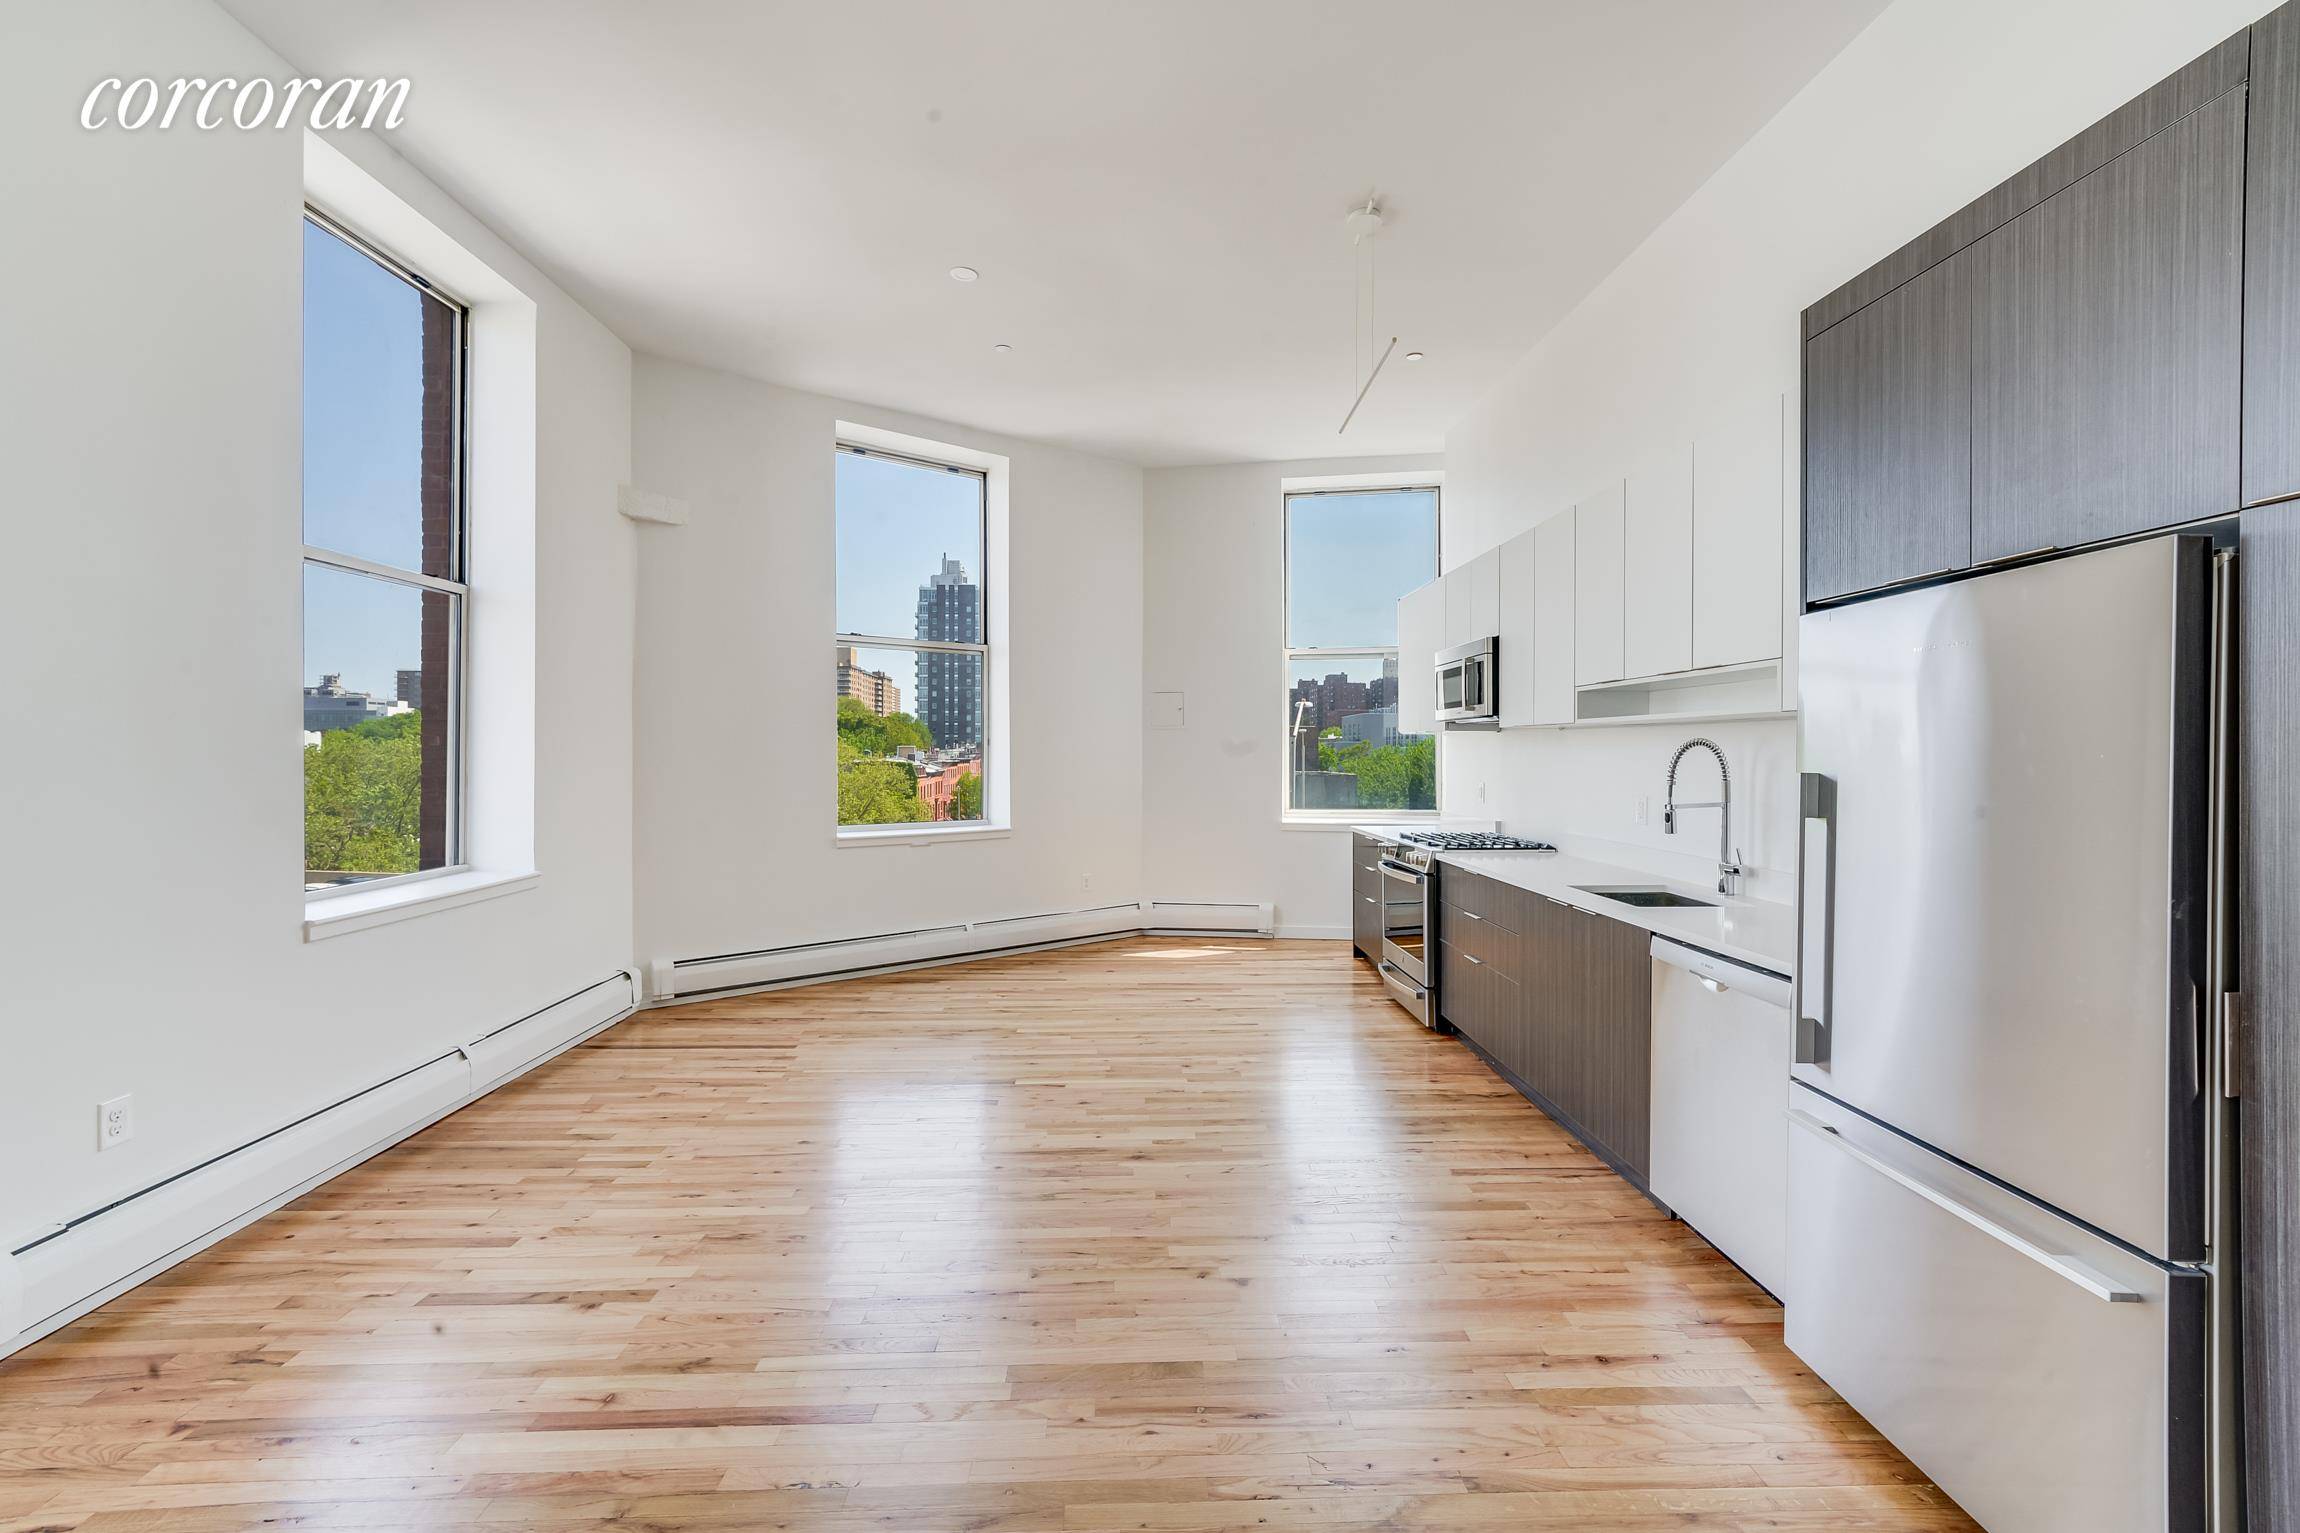 No Fee 1 month freeFully gut renovated 1100sf corner loft with original 1880 wood columns and iron work.